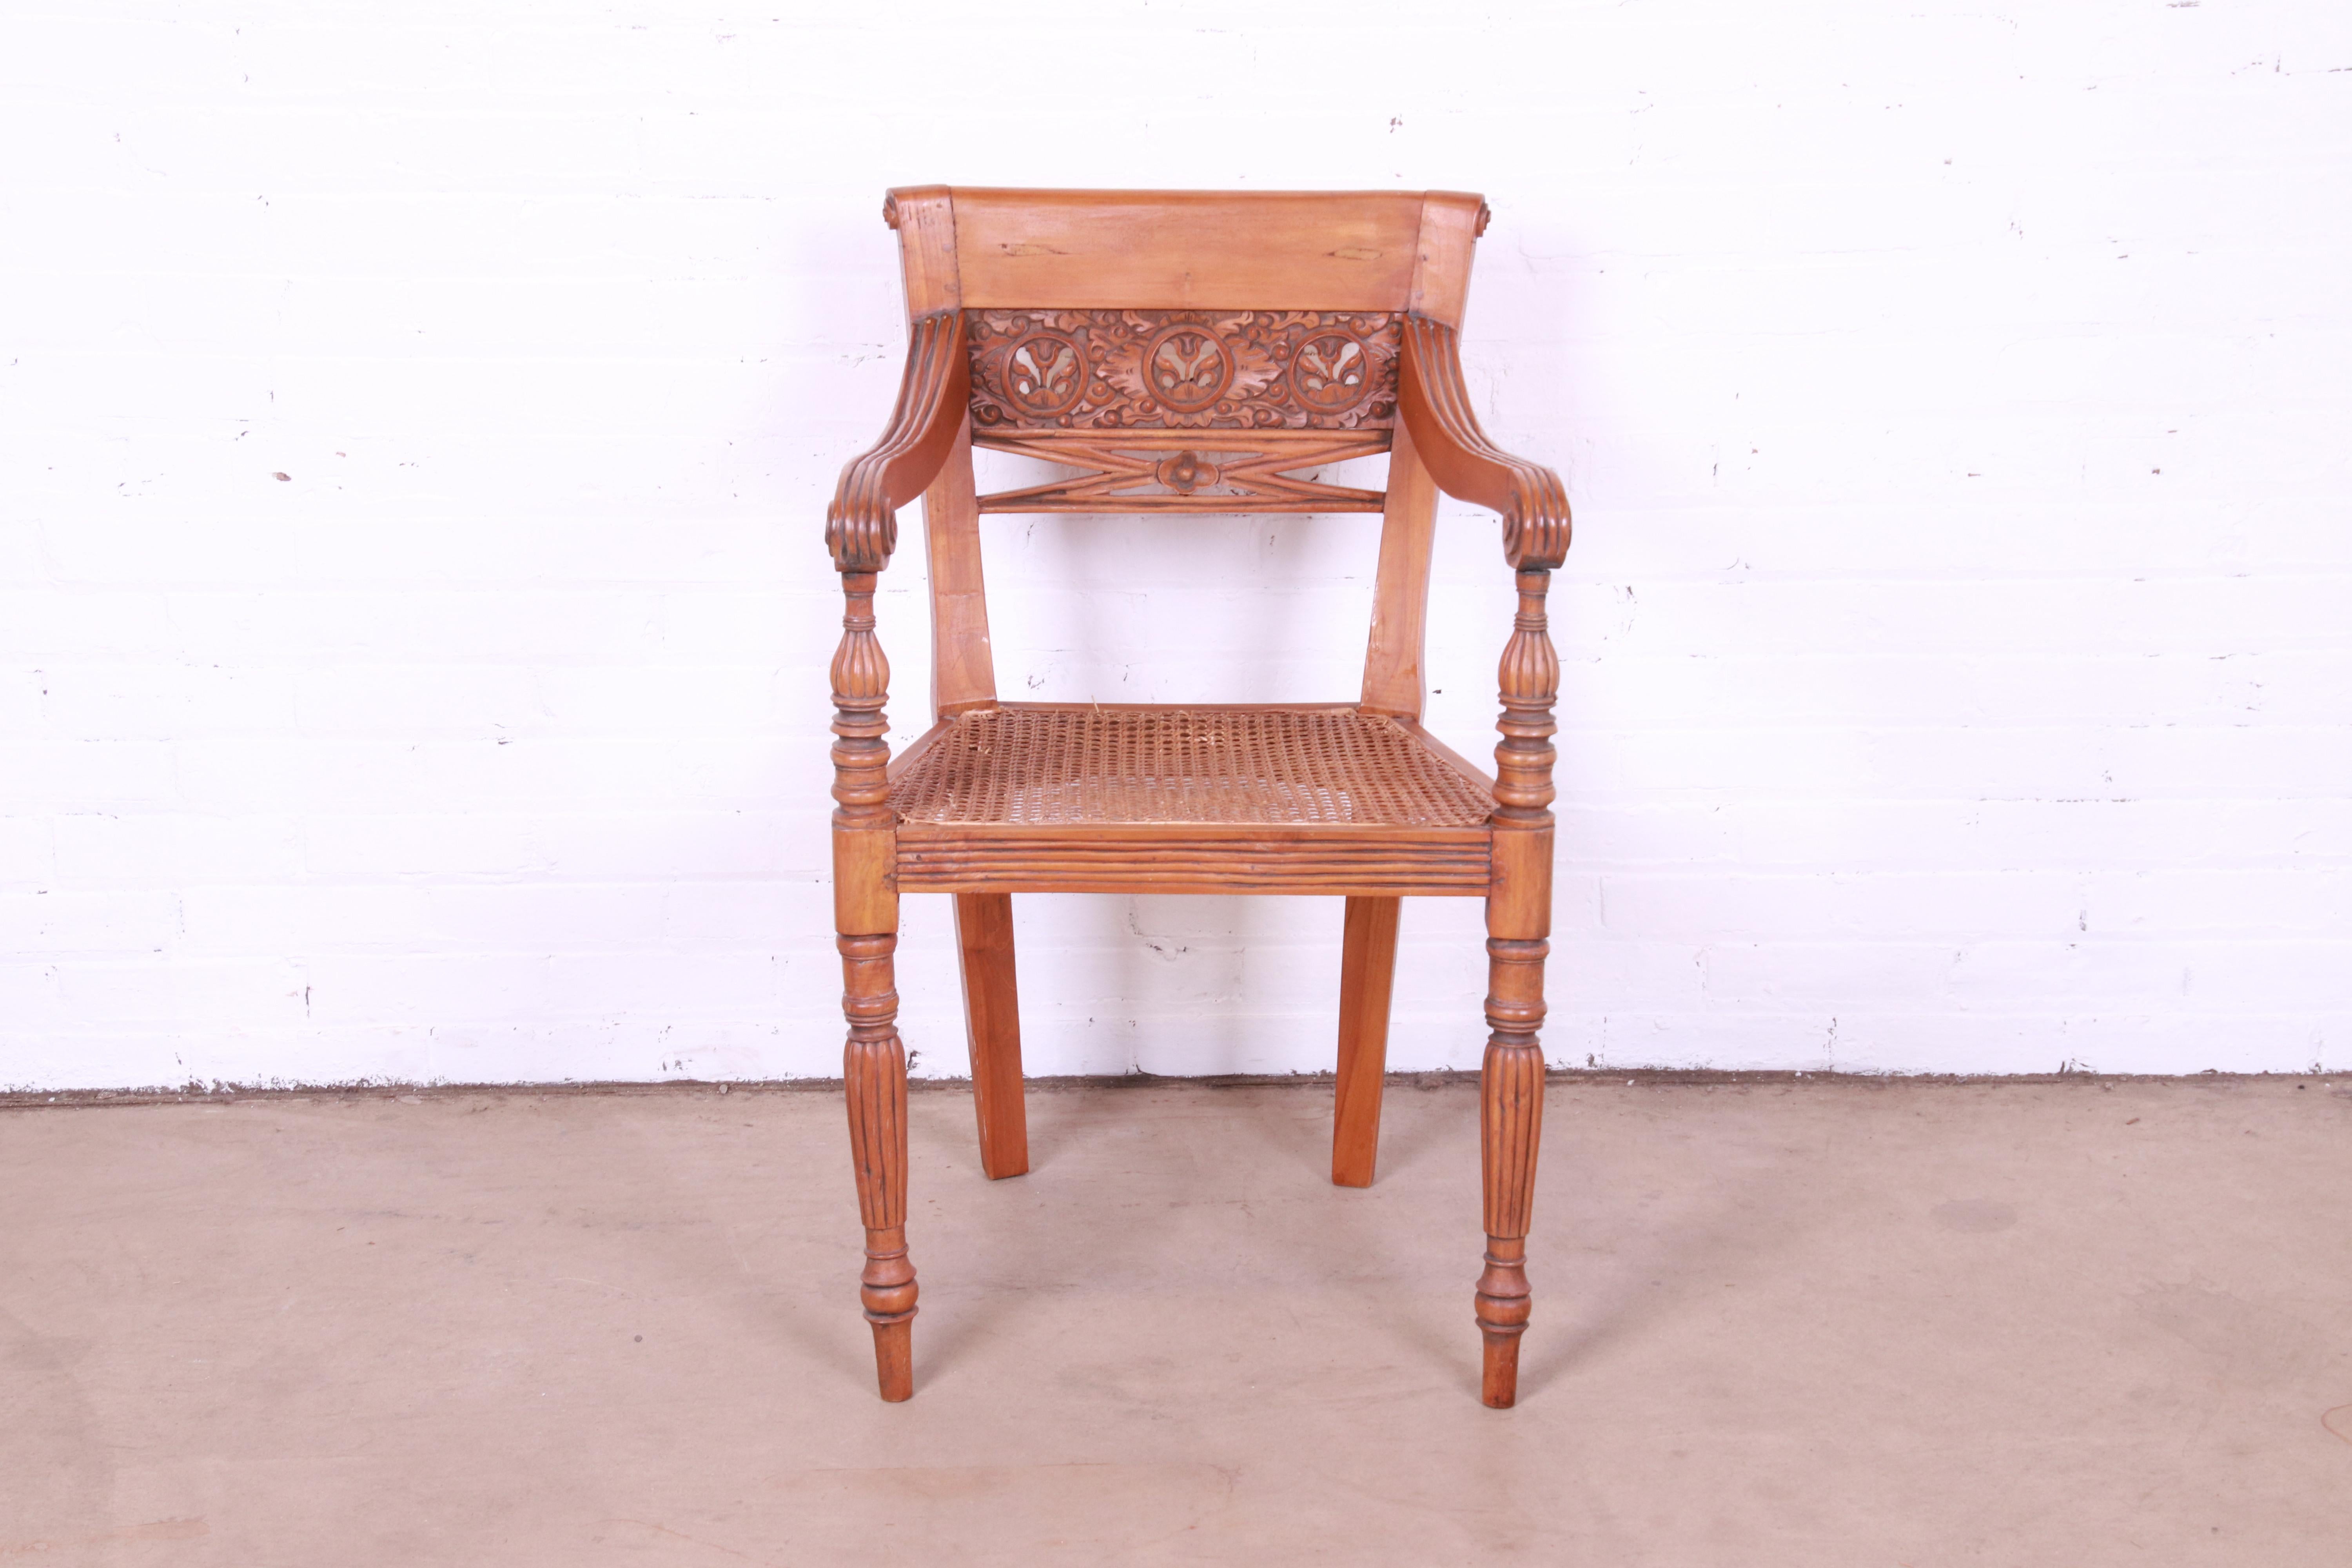 Vintage Regency Carved Walnut and Cane Armchair, Circa 1940s In Good Condition For Sale In South Bend, IN